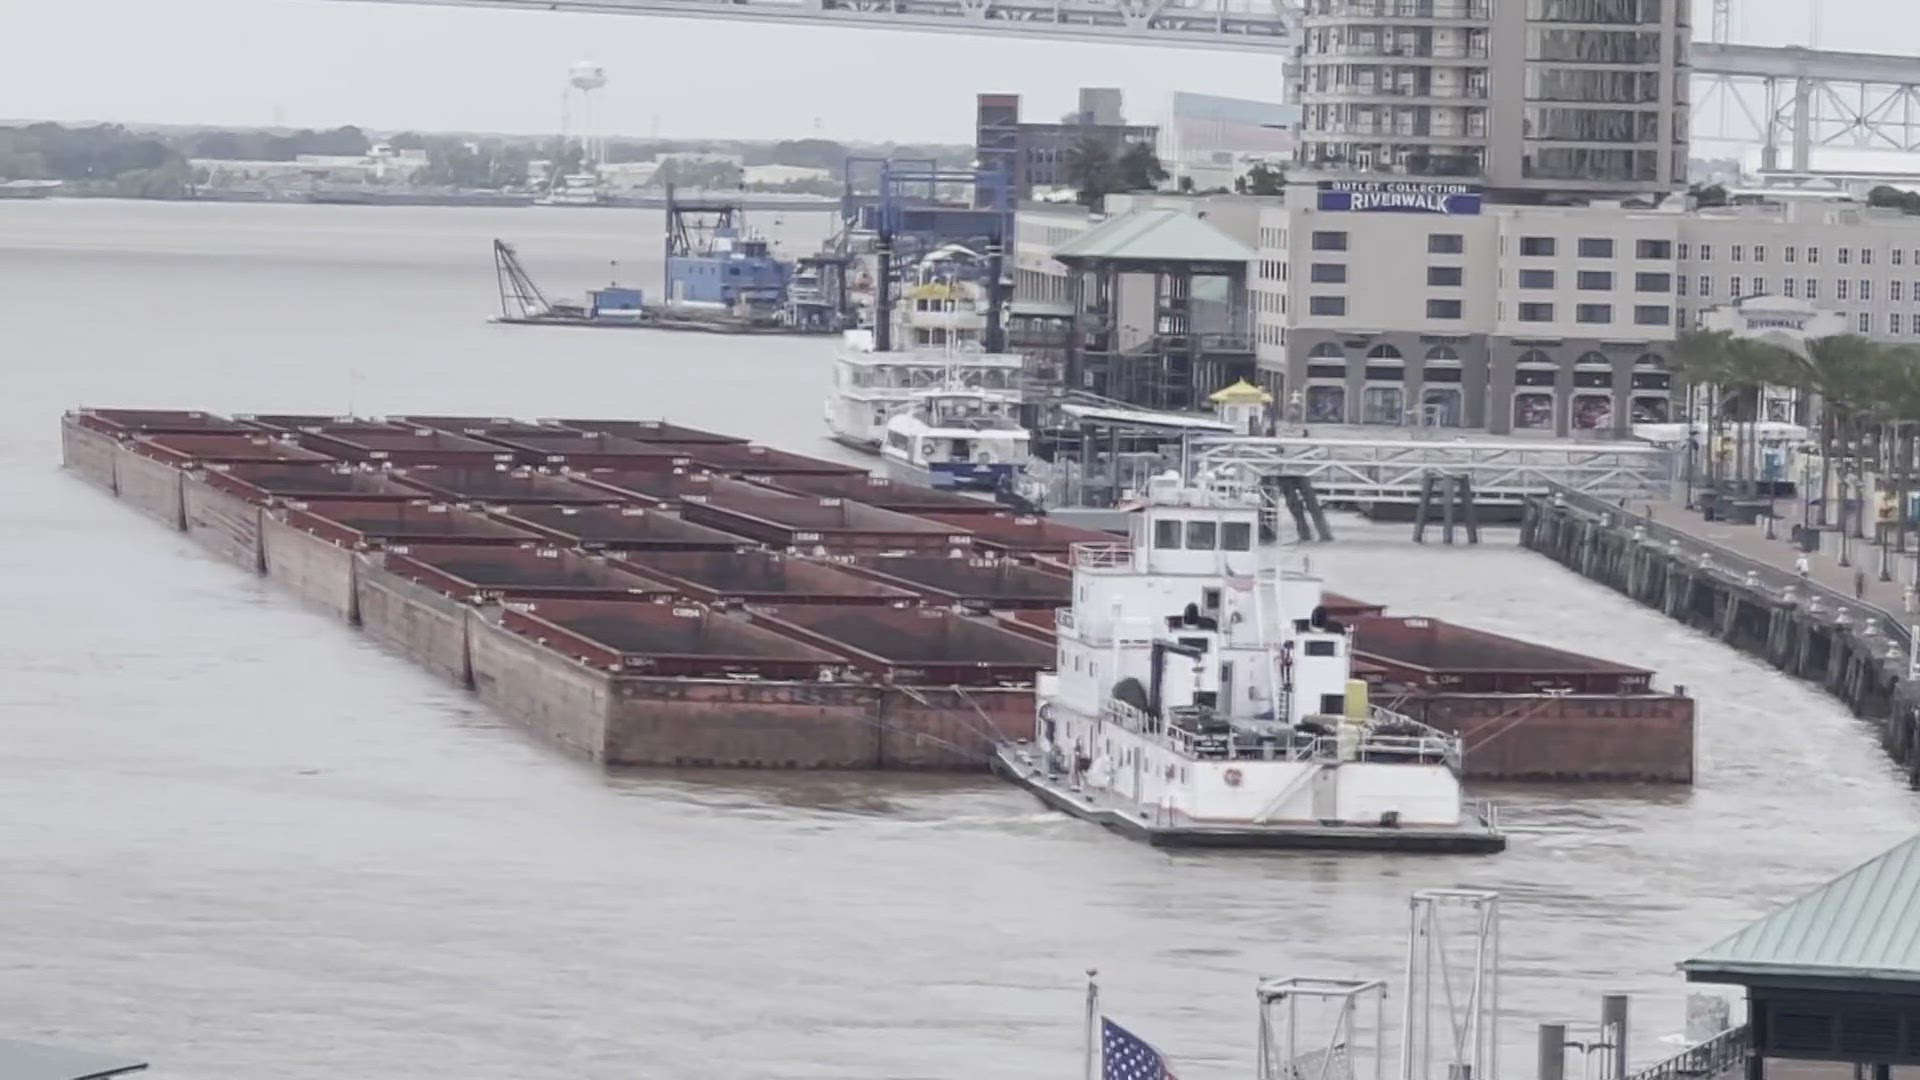 There were some tense moments on the Mississippi as a towboat narrowly avoided a collision with boats docked along New Orleans riverfront.